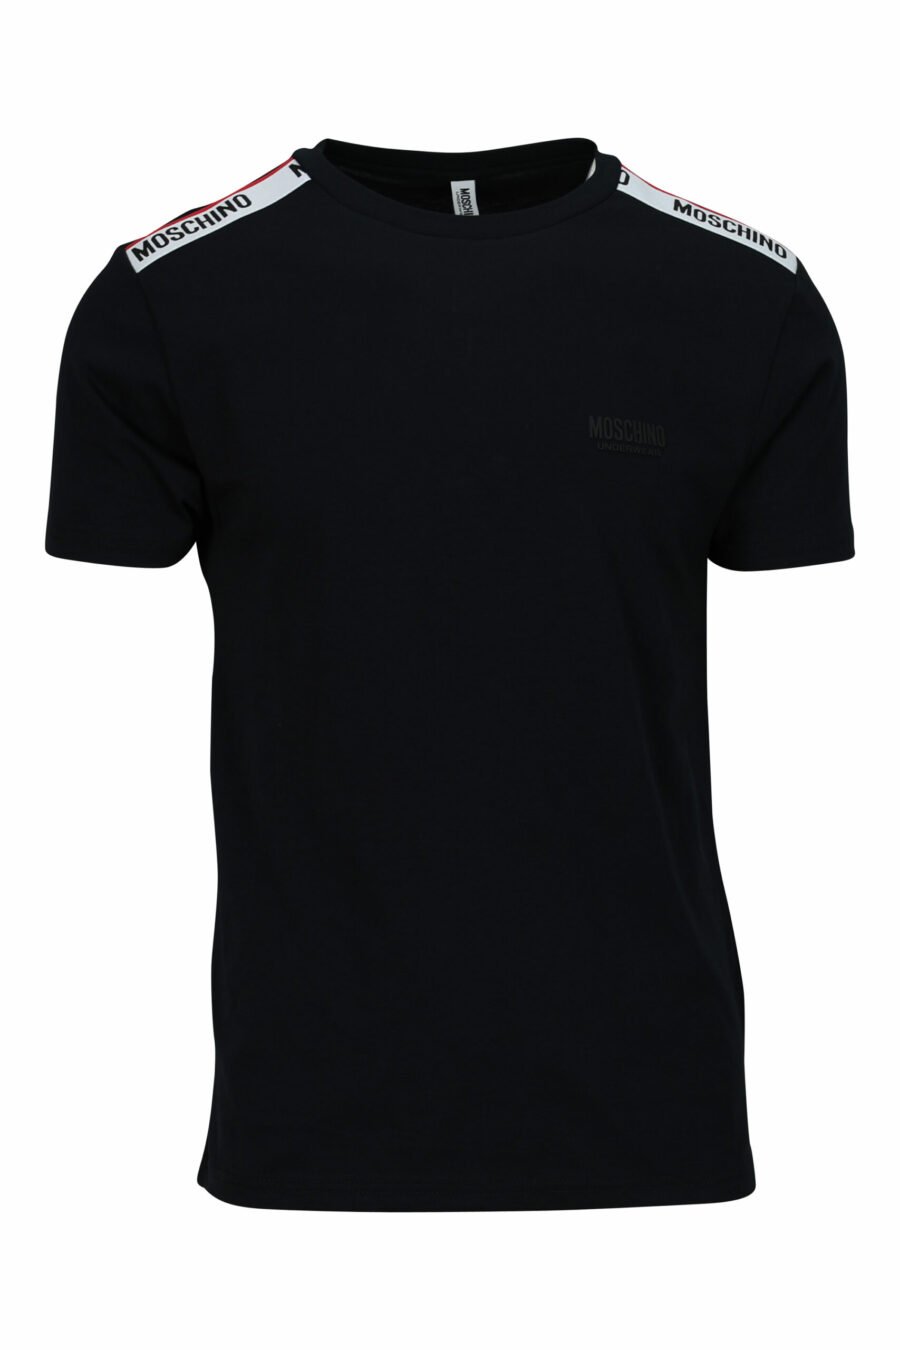 Black T-shirt with white logo with red ribbon detail on shoulders - 667113604275 scaled